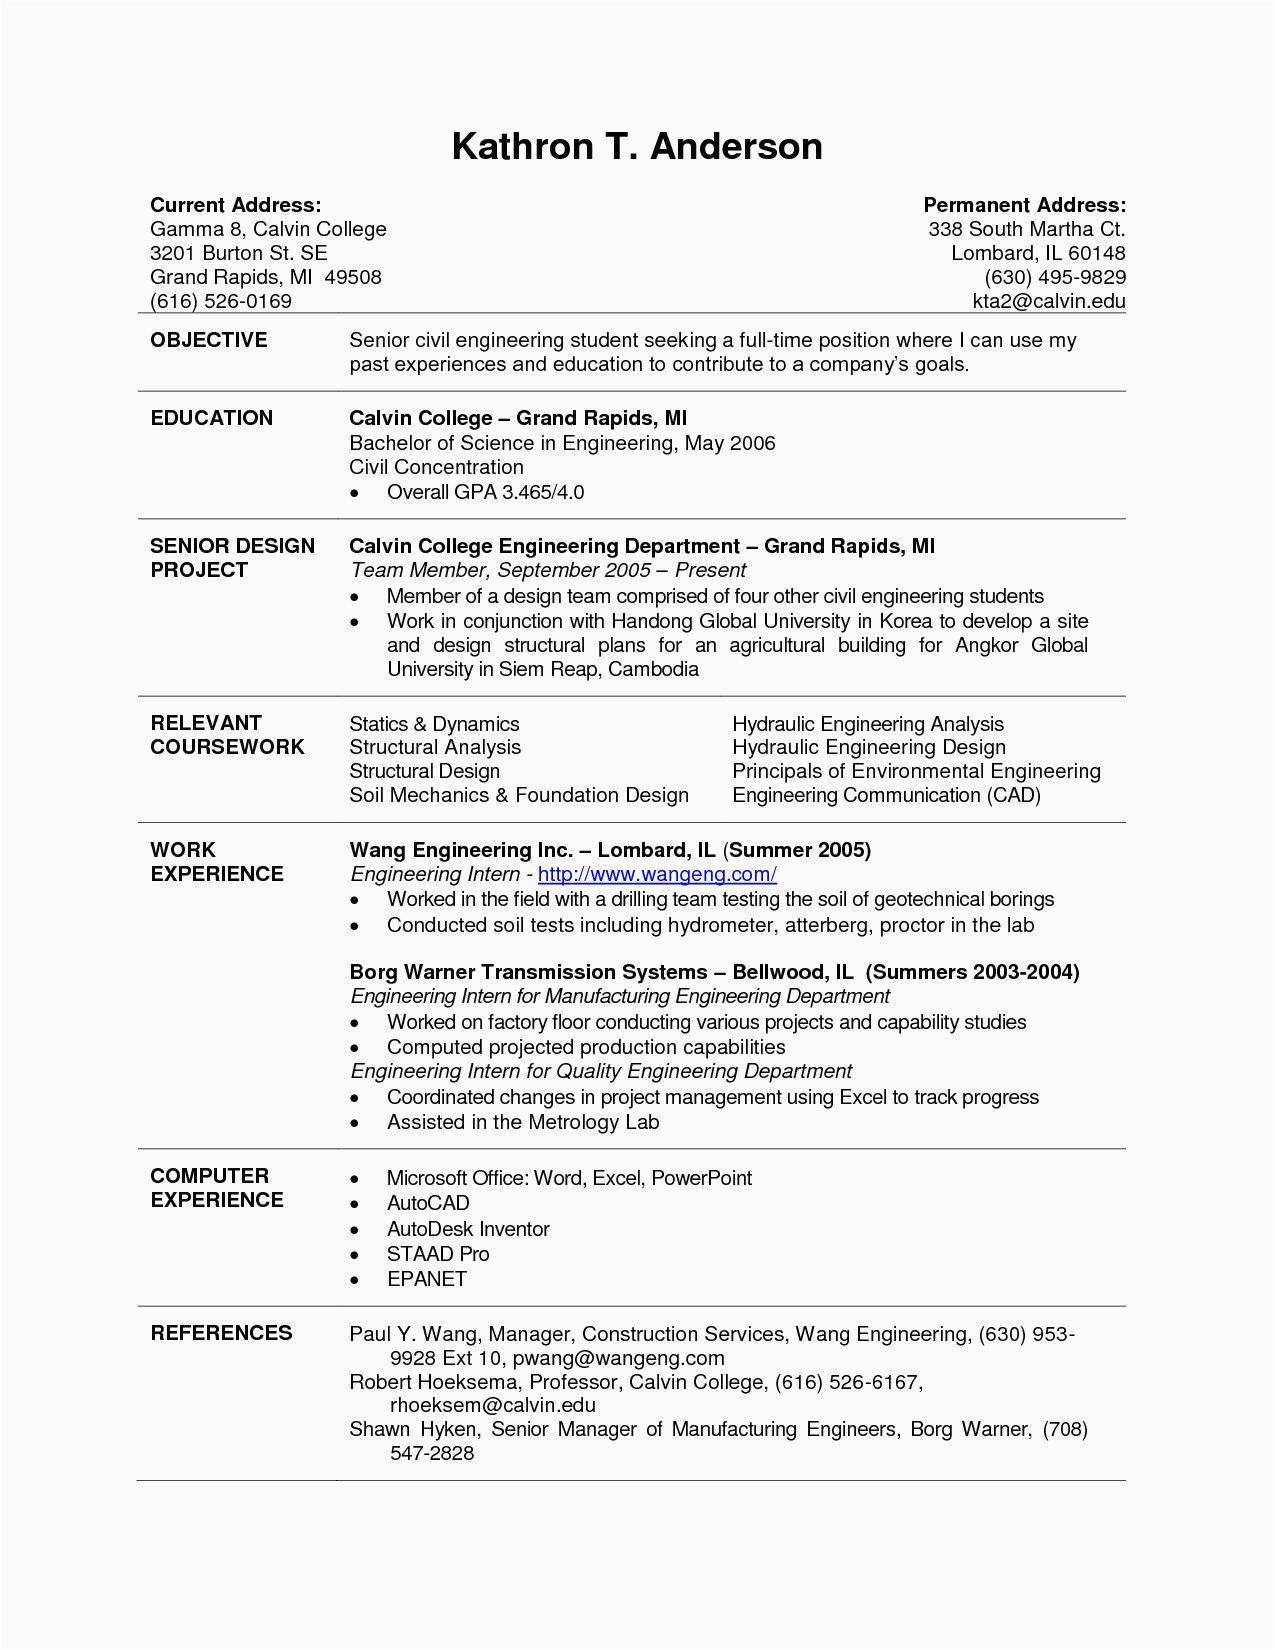 Resume Samples for Students with Little Experience Resume Examples College Students Little Experience In 2021